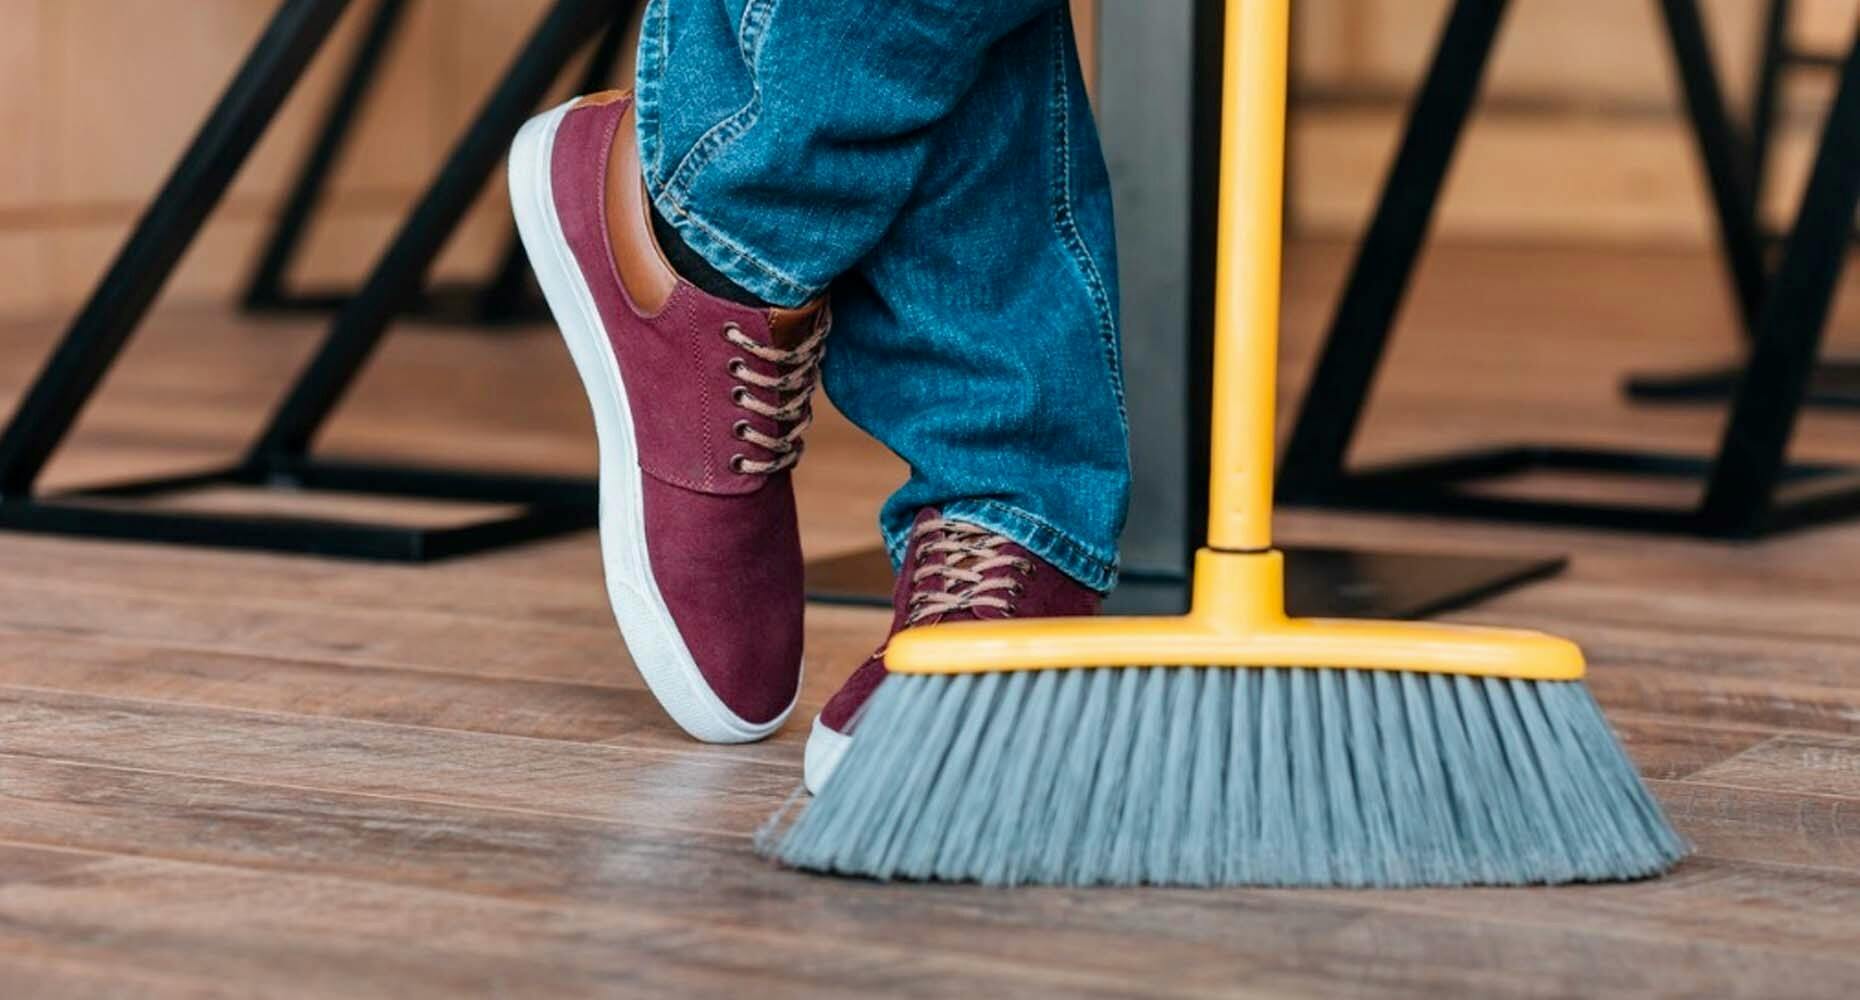 shoes and a broom